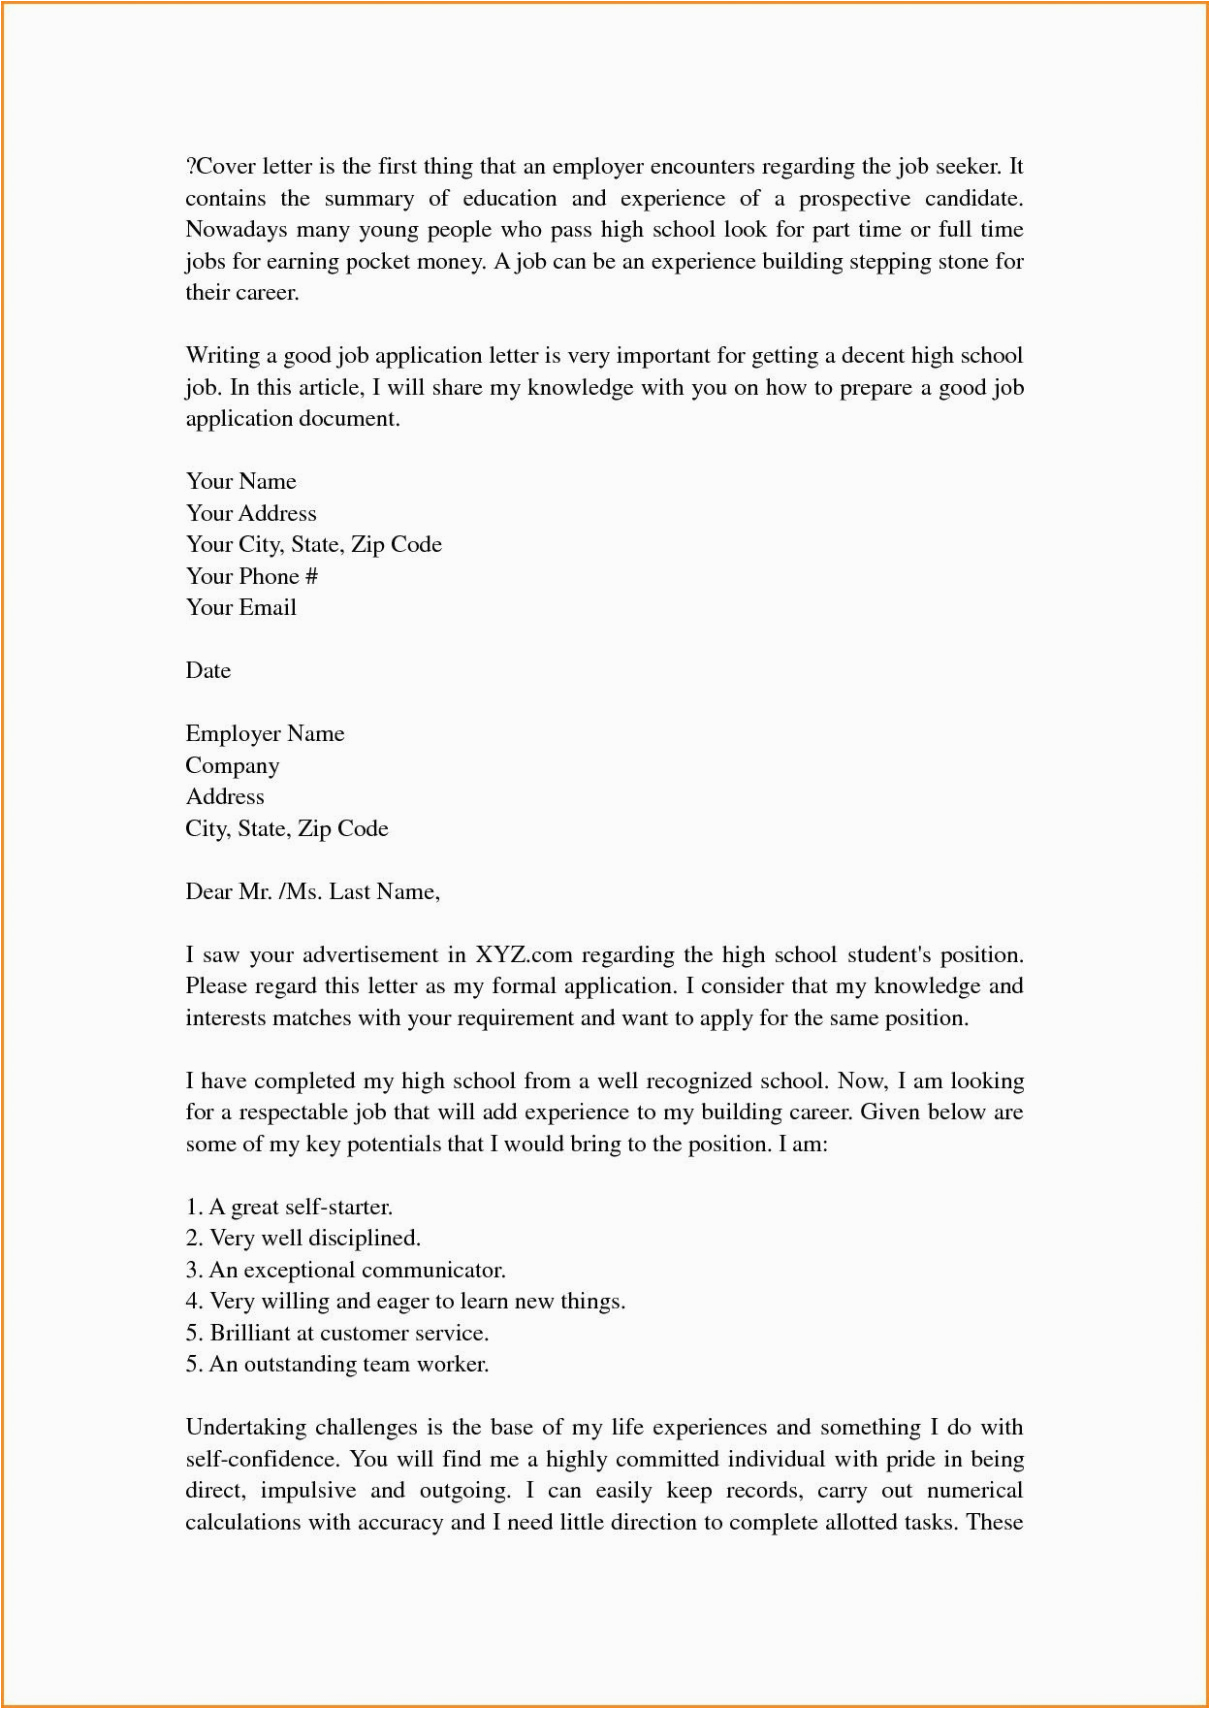 Sample Resume and Cover Letter for High School Students Cover Letter Template High School Understanding the